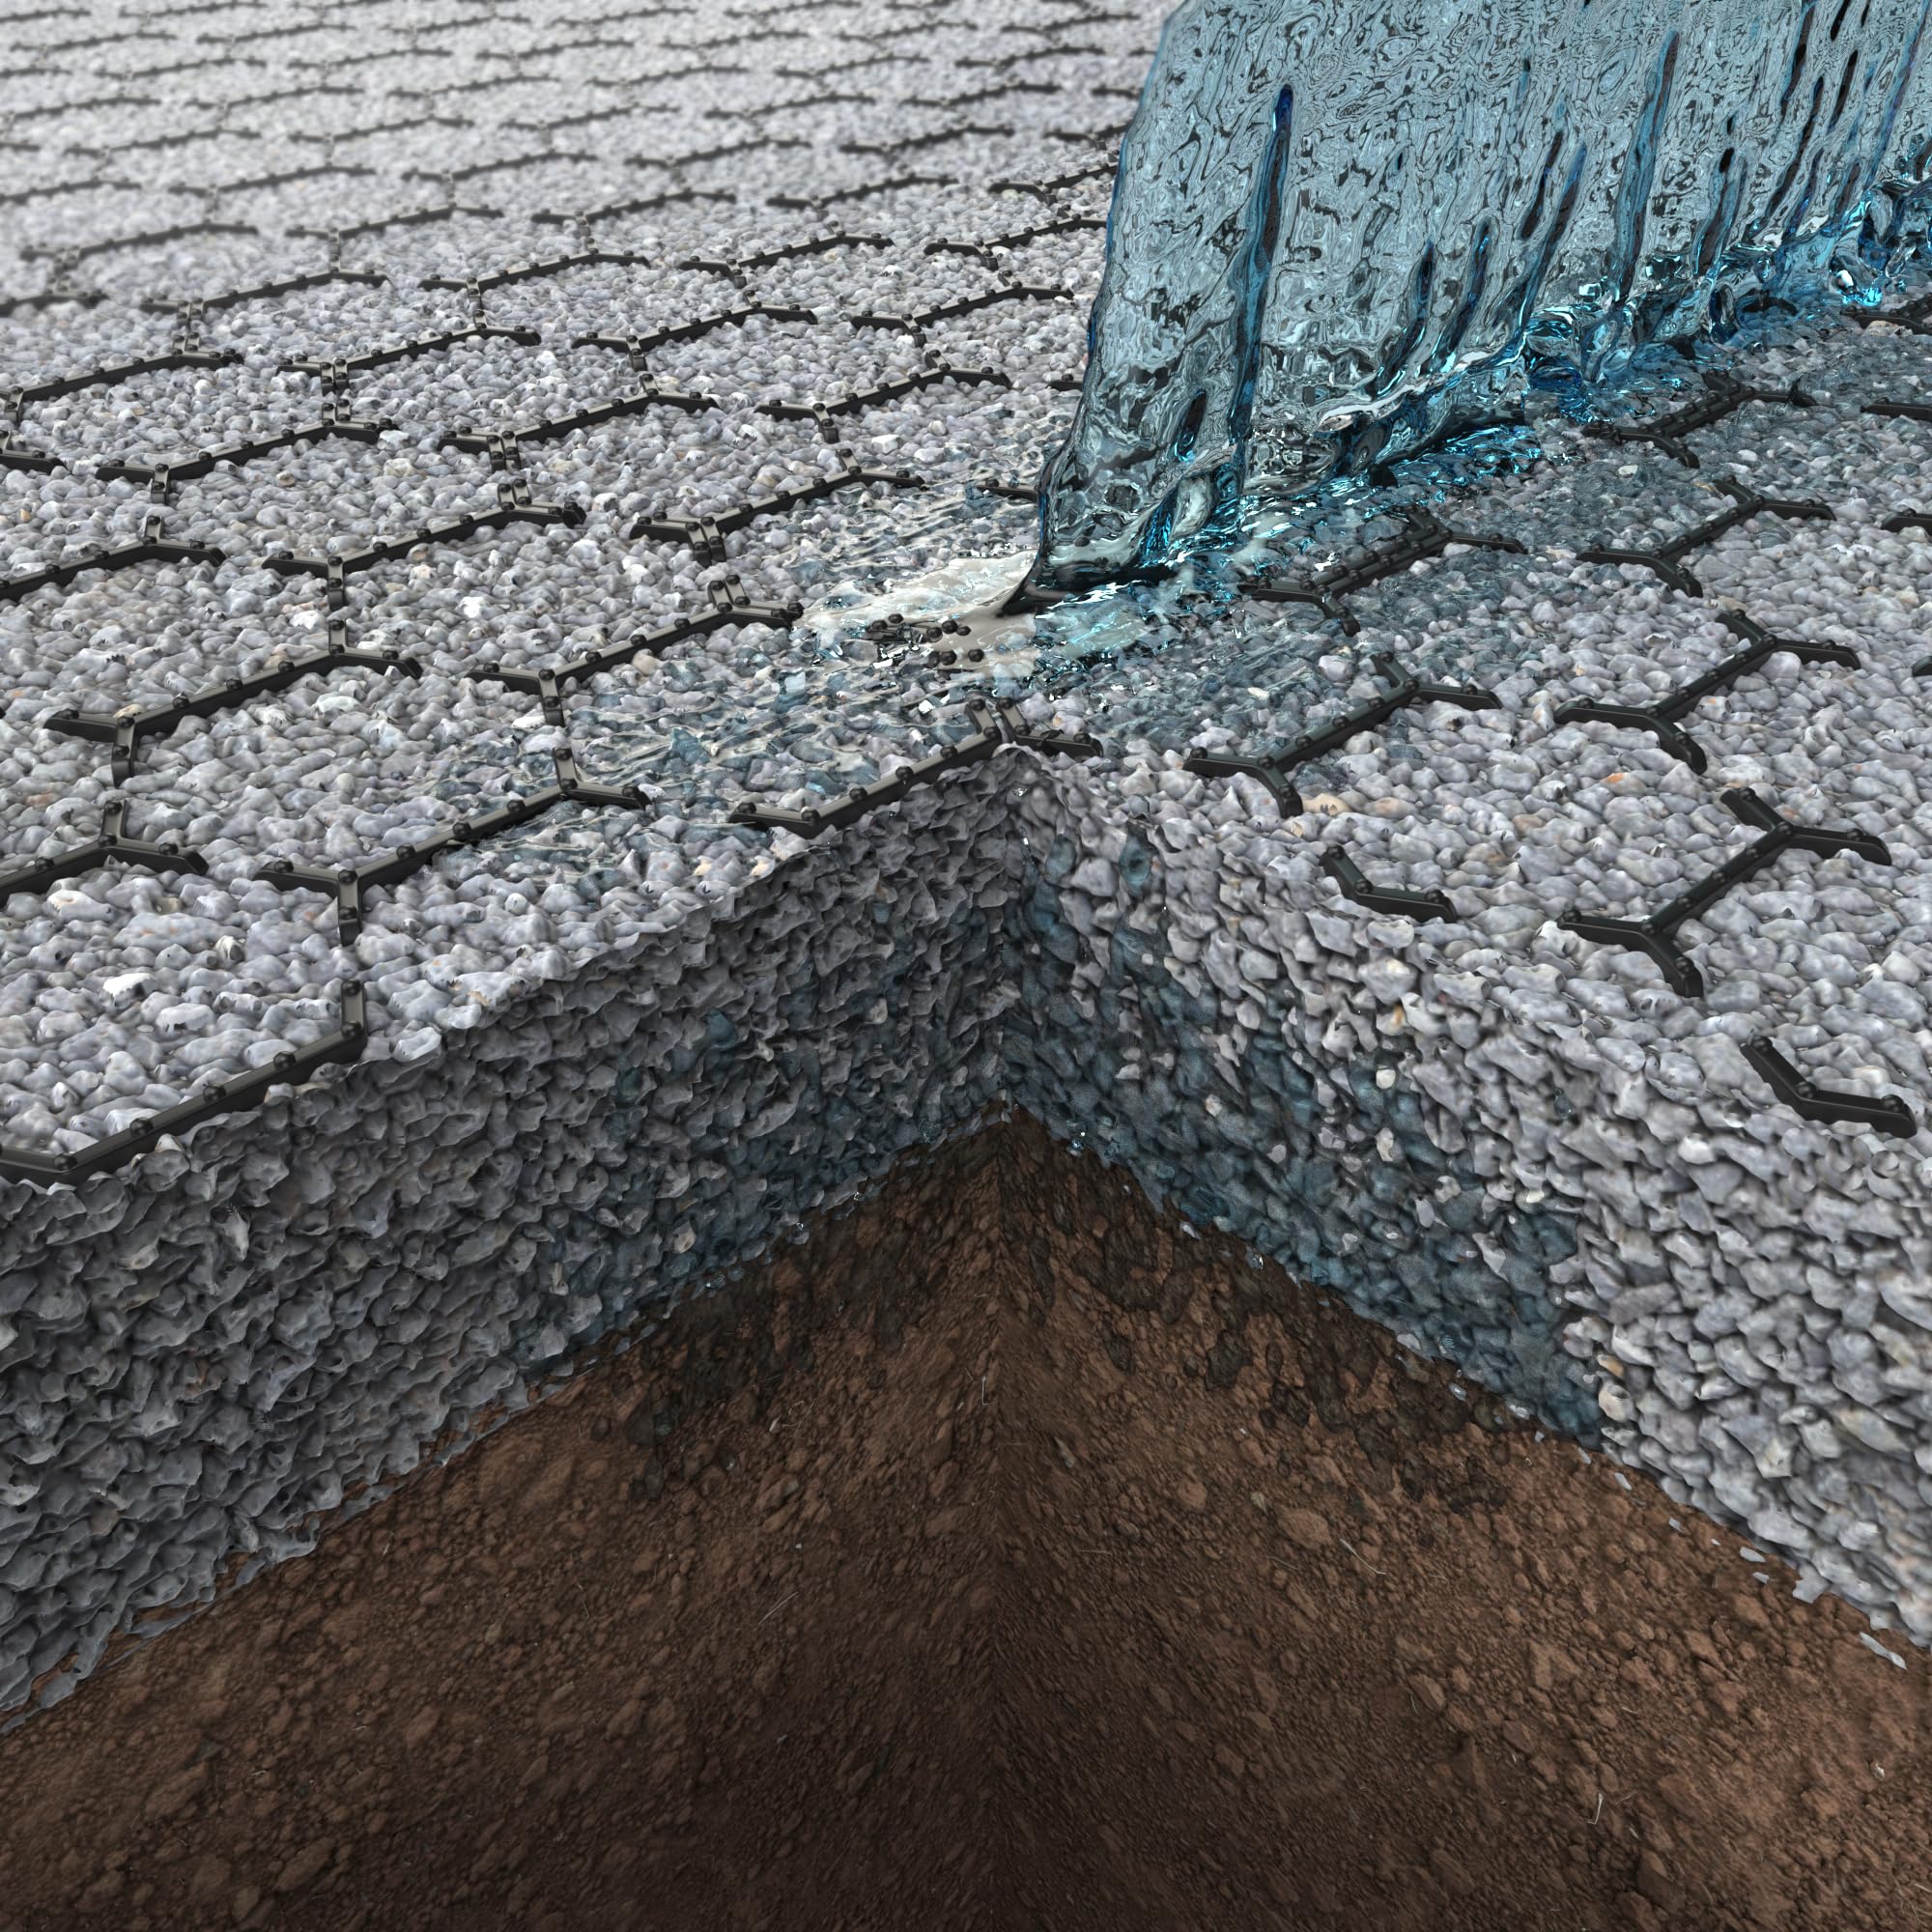 Vodaland Permeable Pavers - HexPave Grass & Gravel Permeable Paver System - 100% Recycled PPE Plastic Pavers, Handles 27,000 lbs, 1" Depth, 65 s.f / 22 Units